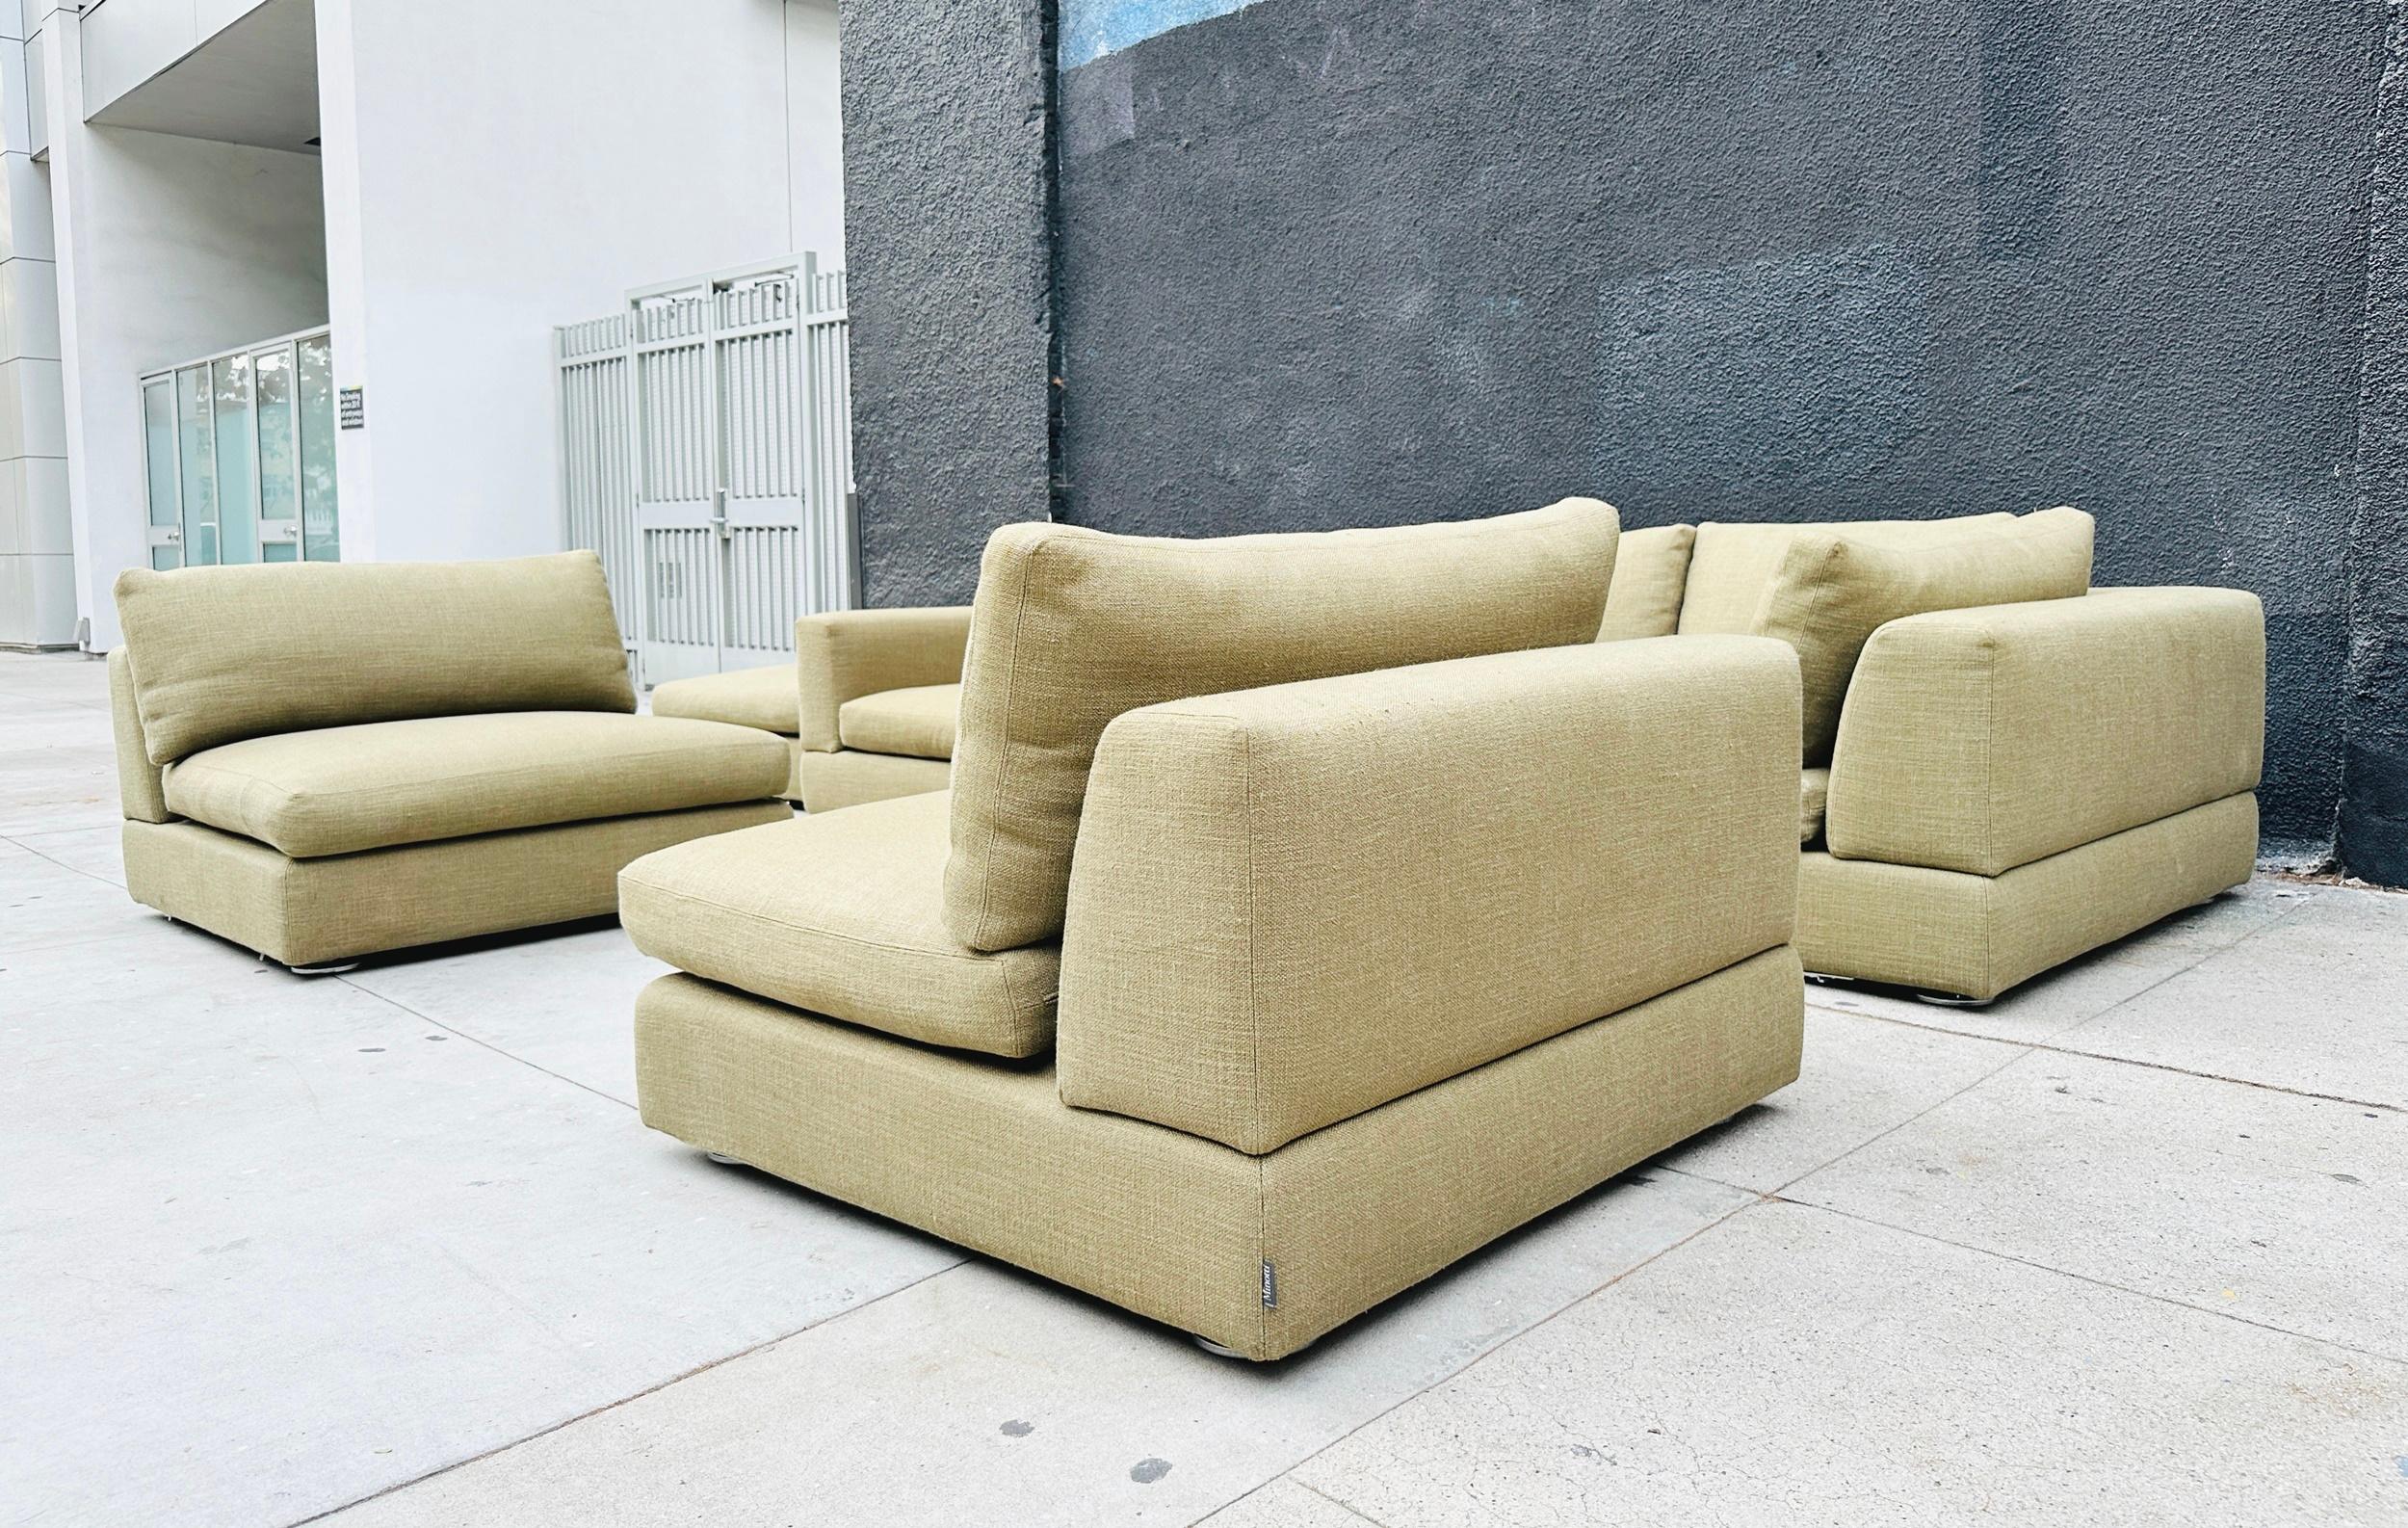 6 Piece Sectional Made in Italy by Rodolfo Dordoni for Minotti, Italy 2006 For Sale 7